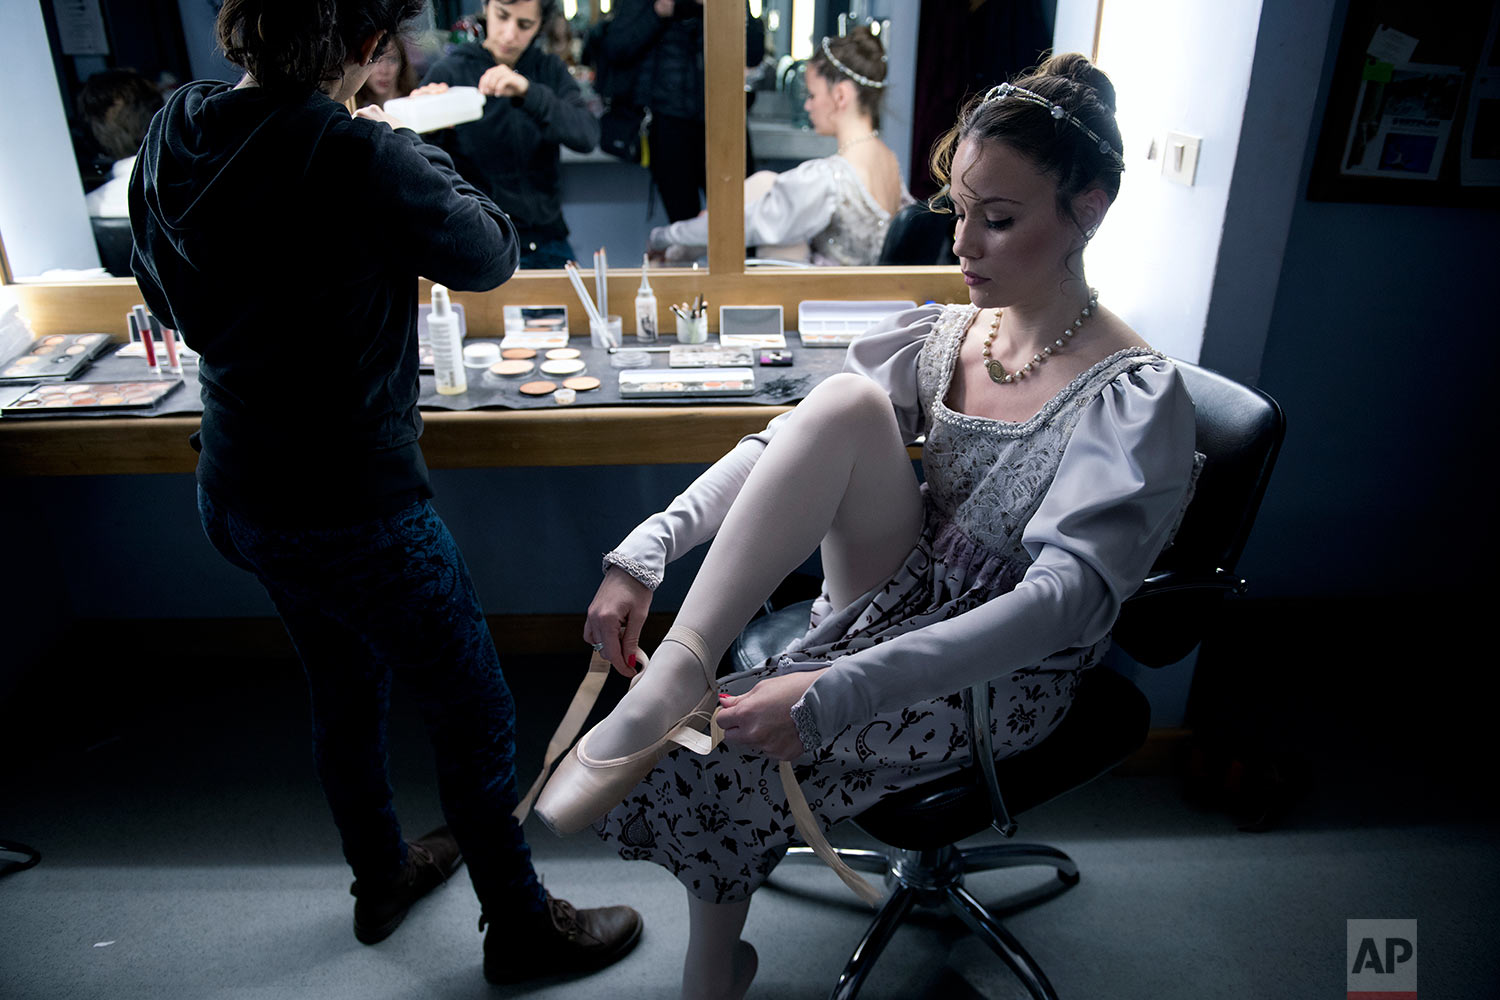  In this Friday, Sept. 15, 2017 photo, a dancer puts her ballet shoes on before a dress rehearsal for Romeo and Juliet in Montevideo, Uruguay. (AP Photo/Matilde Campodonico) 